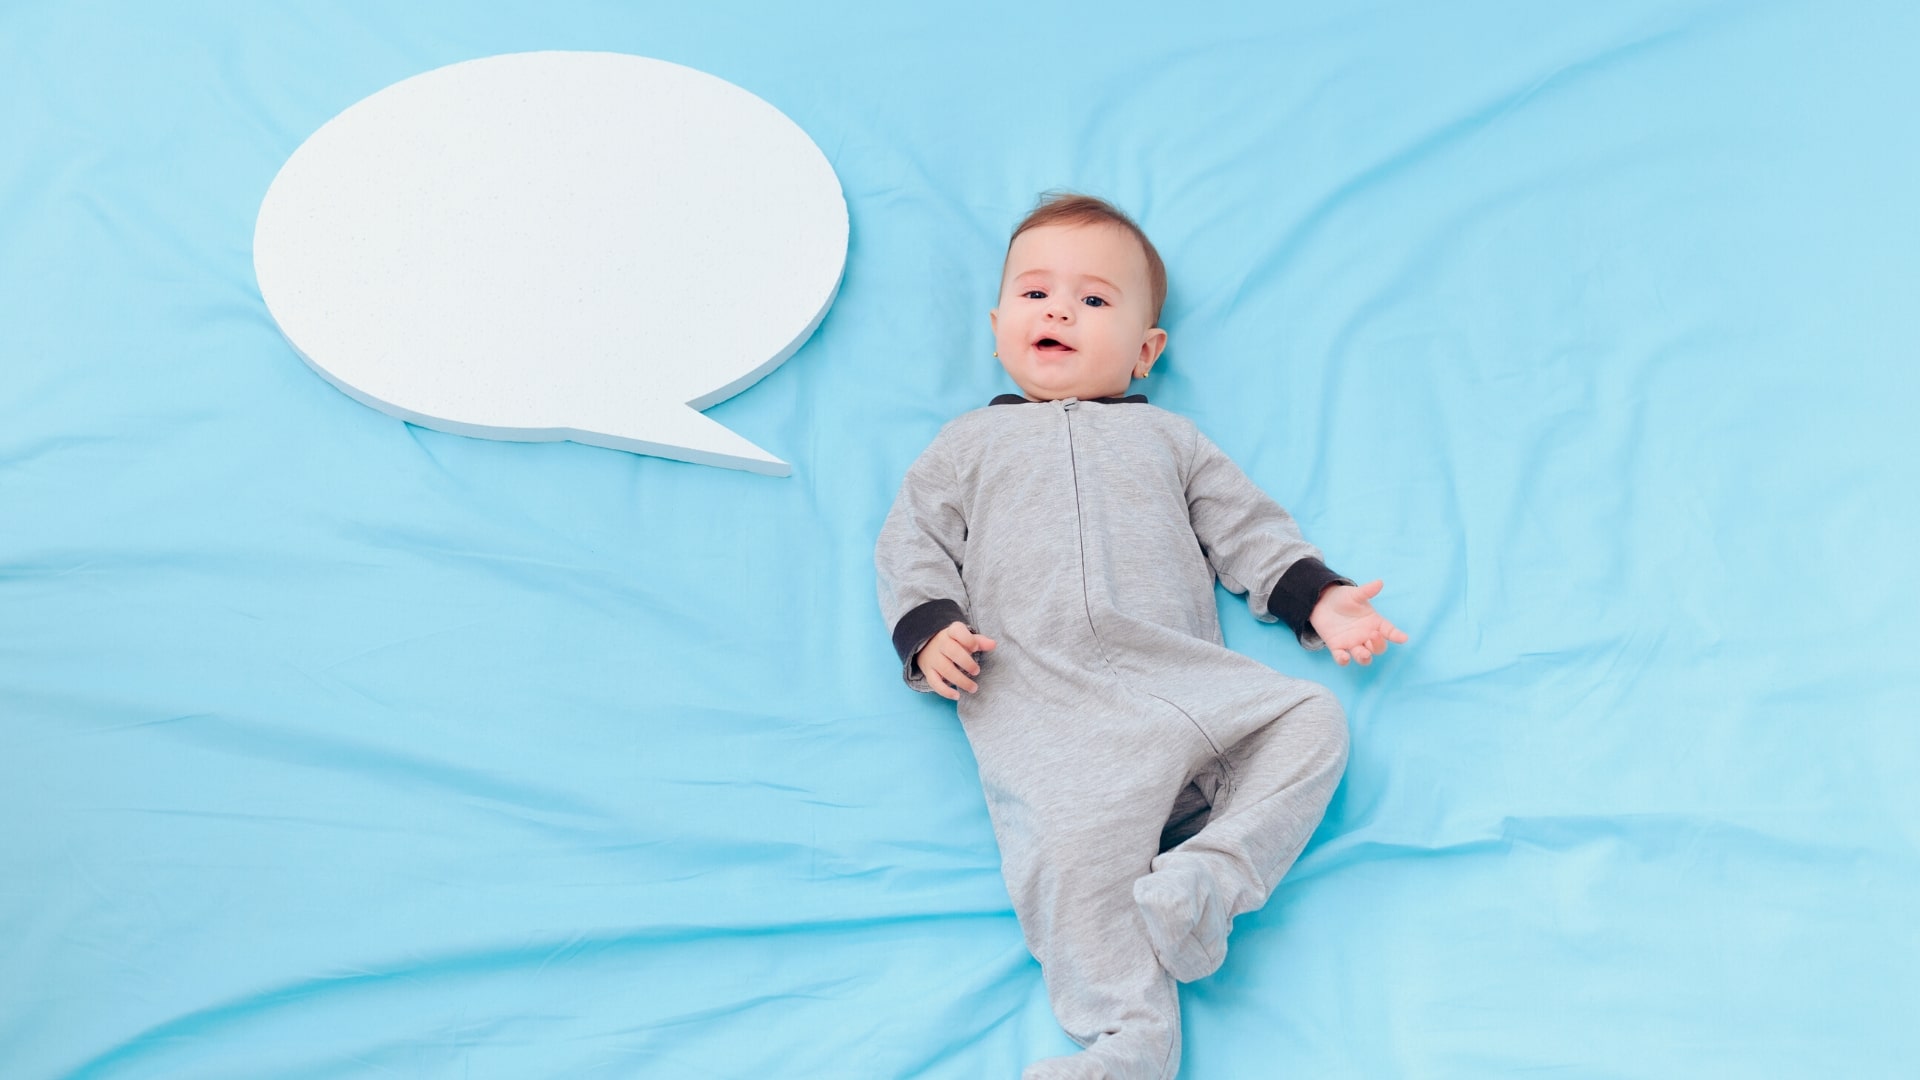 Stages of Language Development In 0-5 Year Olds